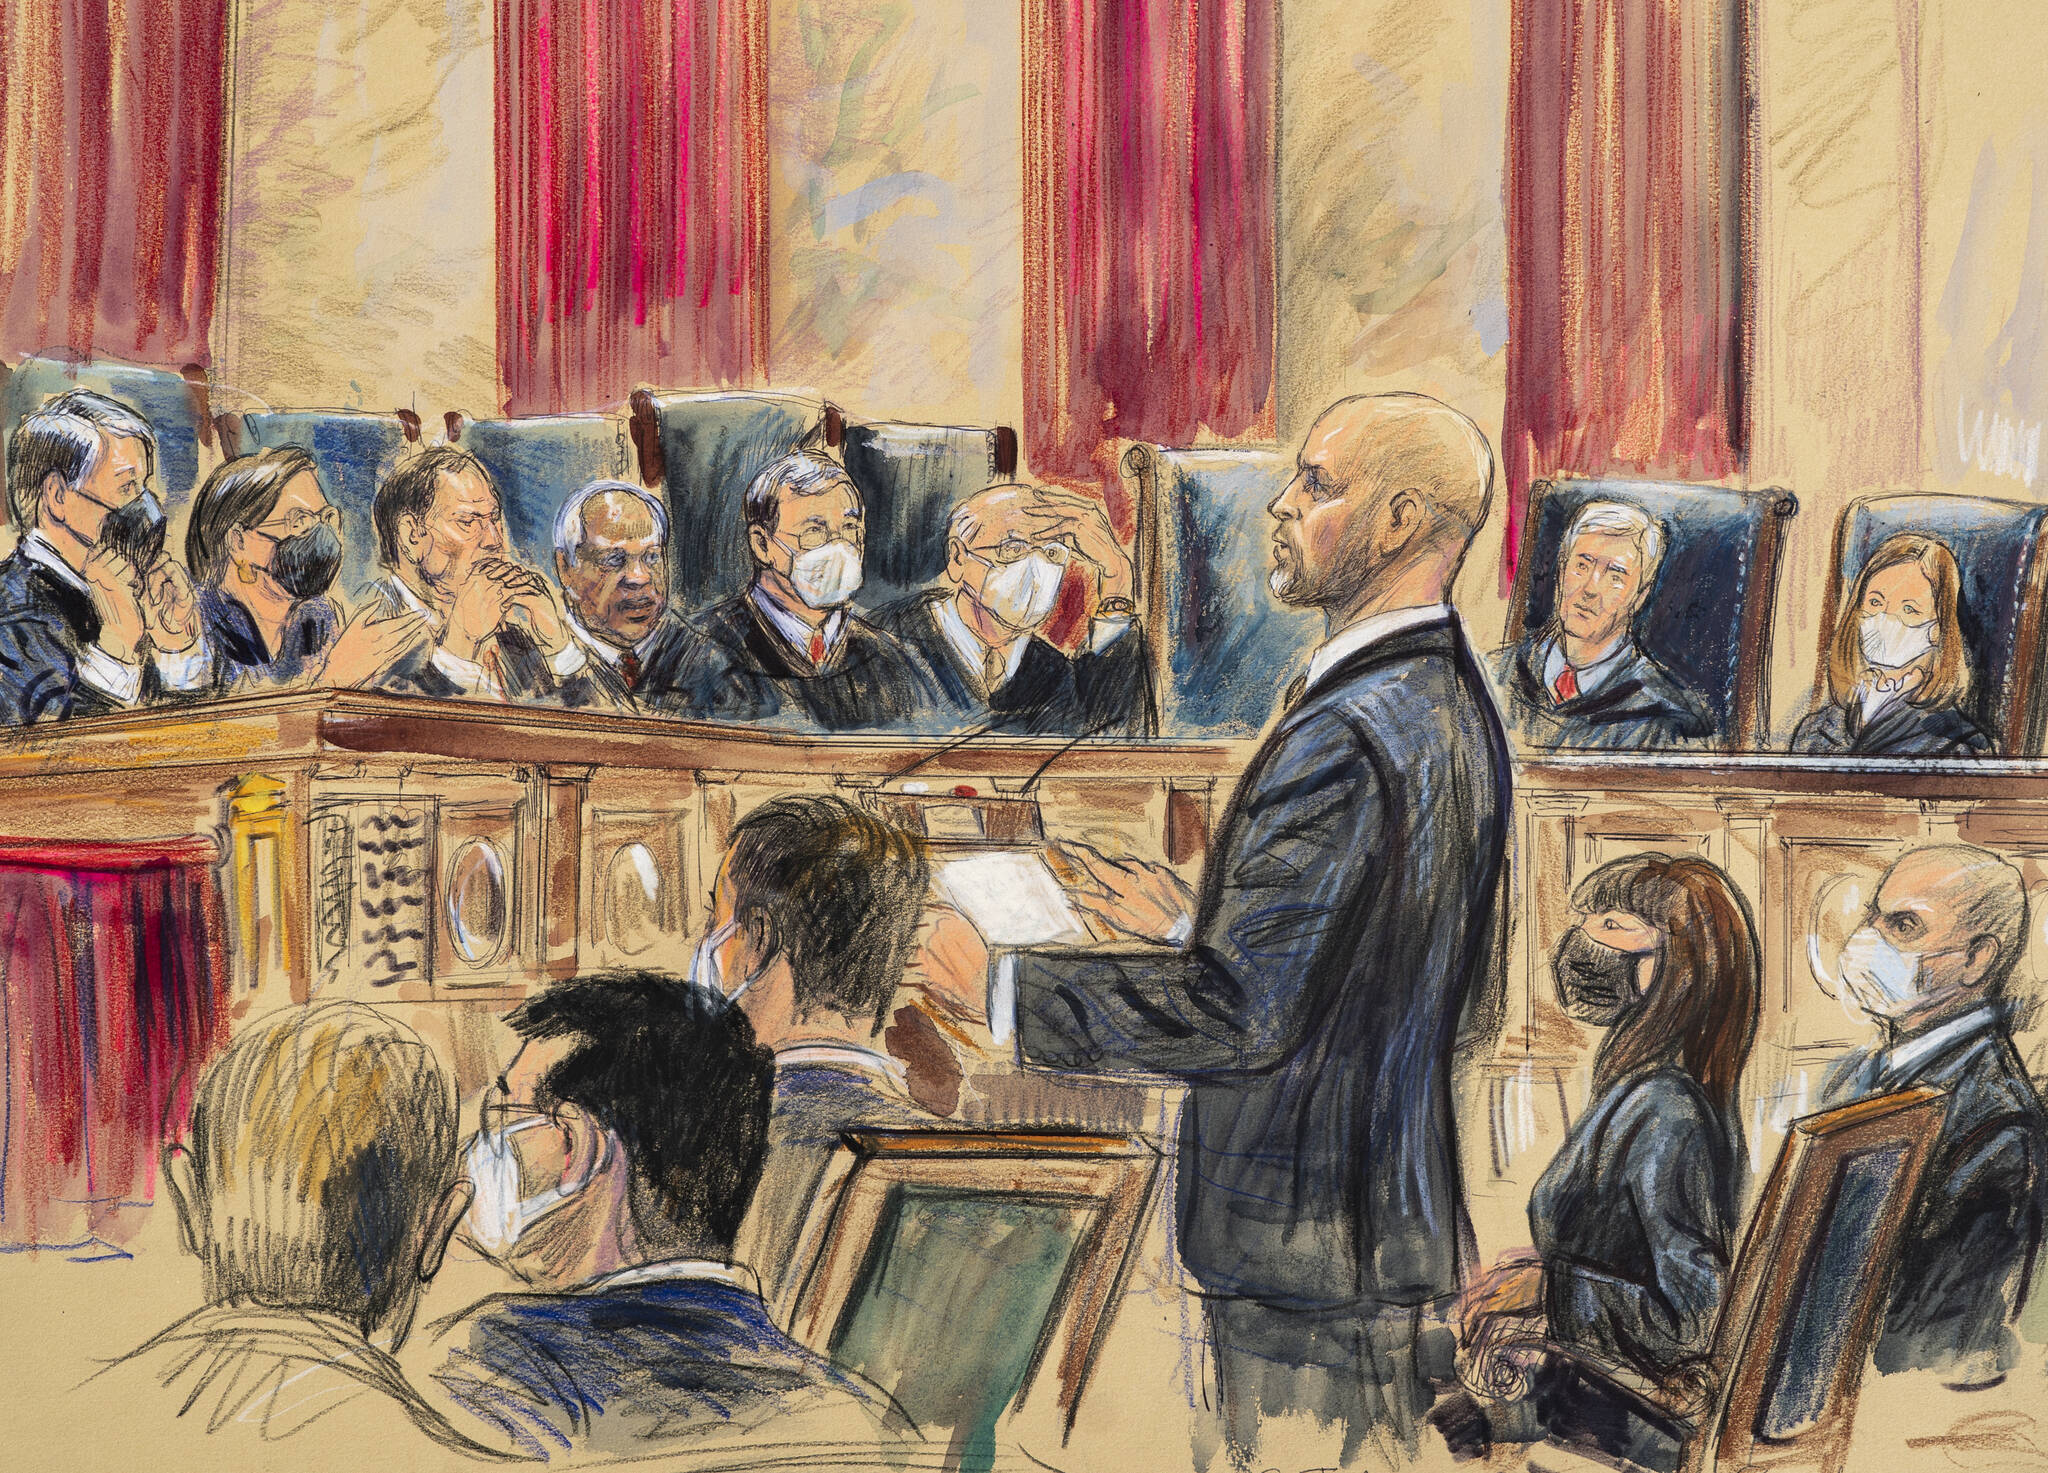 This artist sketch depicts lawyer Scott Keller standing to argue on behalf of more than two dozen business groups seeking an immediate order from the Supreme Court to halt a Biden administration order to impose a vaccine-or-testing requirement on the nation’s large employers during the COVID-19 pandemic, at the Supreme Court in Washington, Friday, Jan. 7, 2022. Solicitor General Elizabeth Prelogar, the Biden administration’s top Supreme Court lawyer, is seated at right. (Dana Verkouteren)